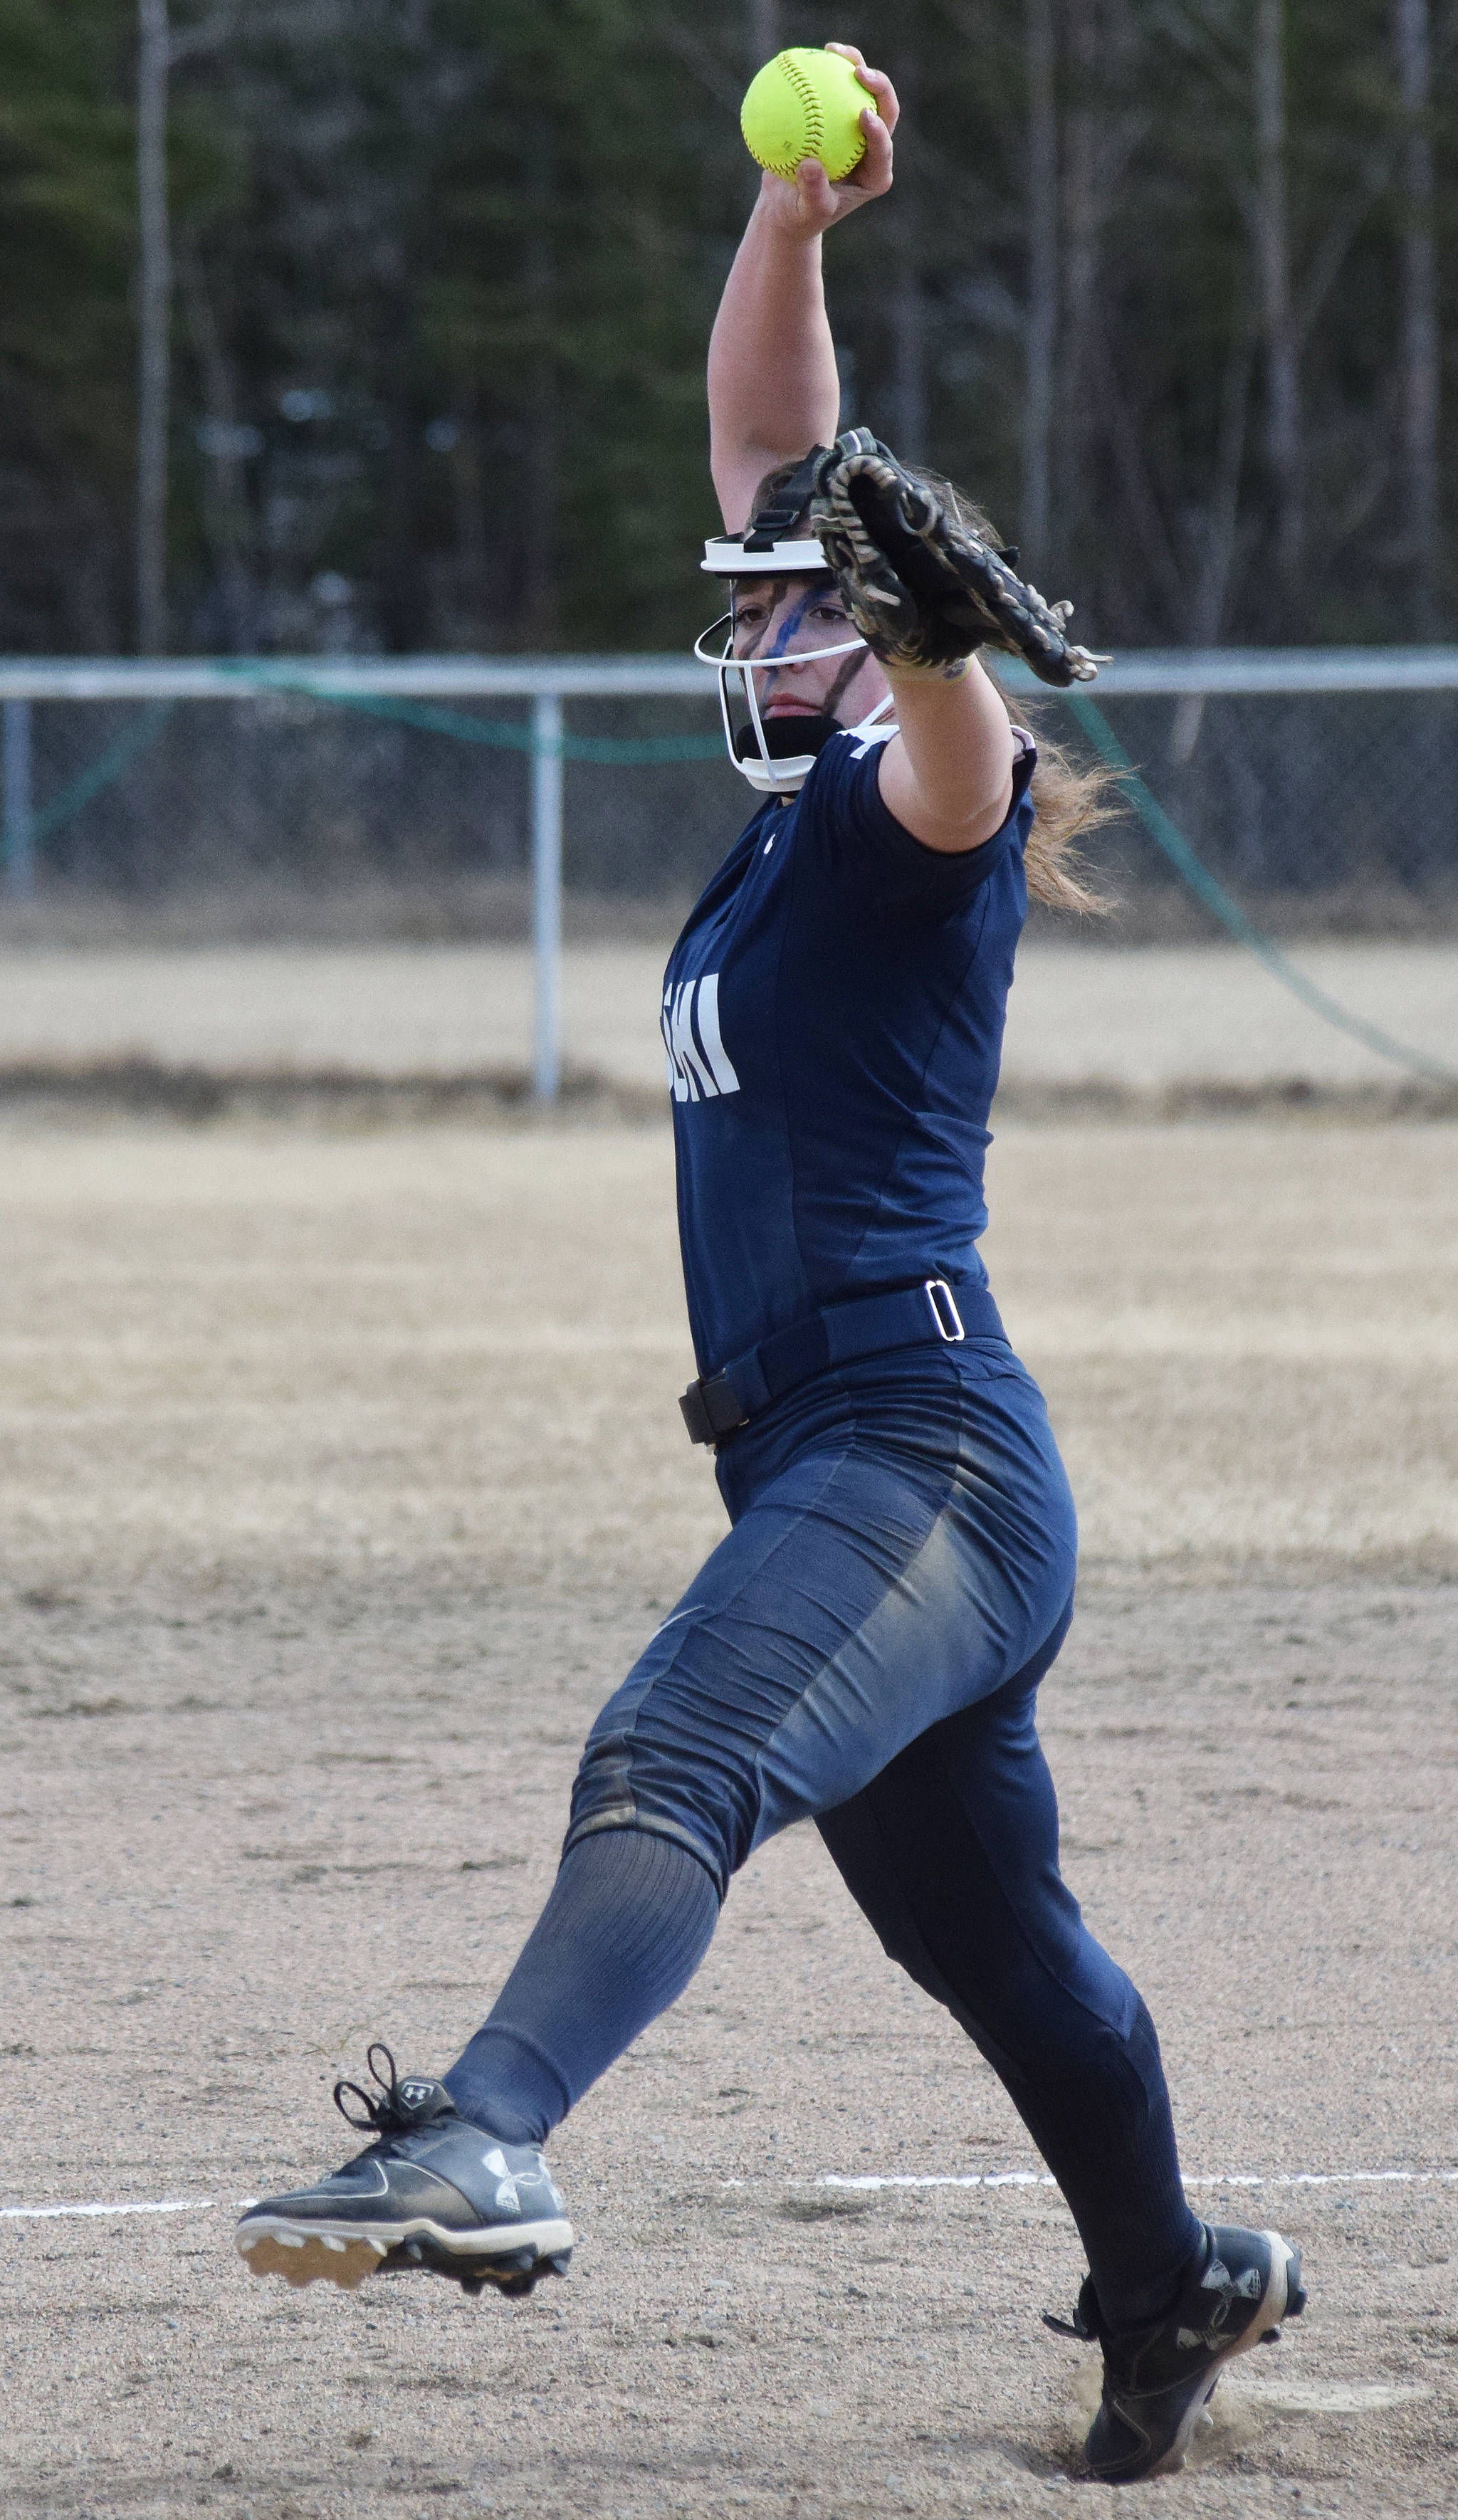 Soldotna’s Casey Earll offers up a pitch to a Kenai Central batter Thursday, April 25, 2019, at the Soldotna Softball Fields. (Photo by Joey Klecka/Peninsula Clarion)